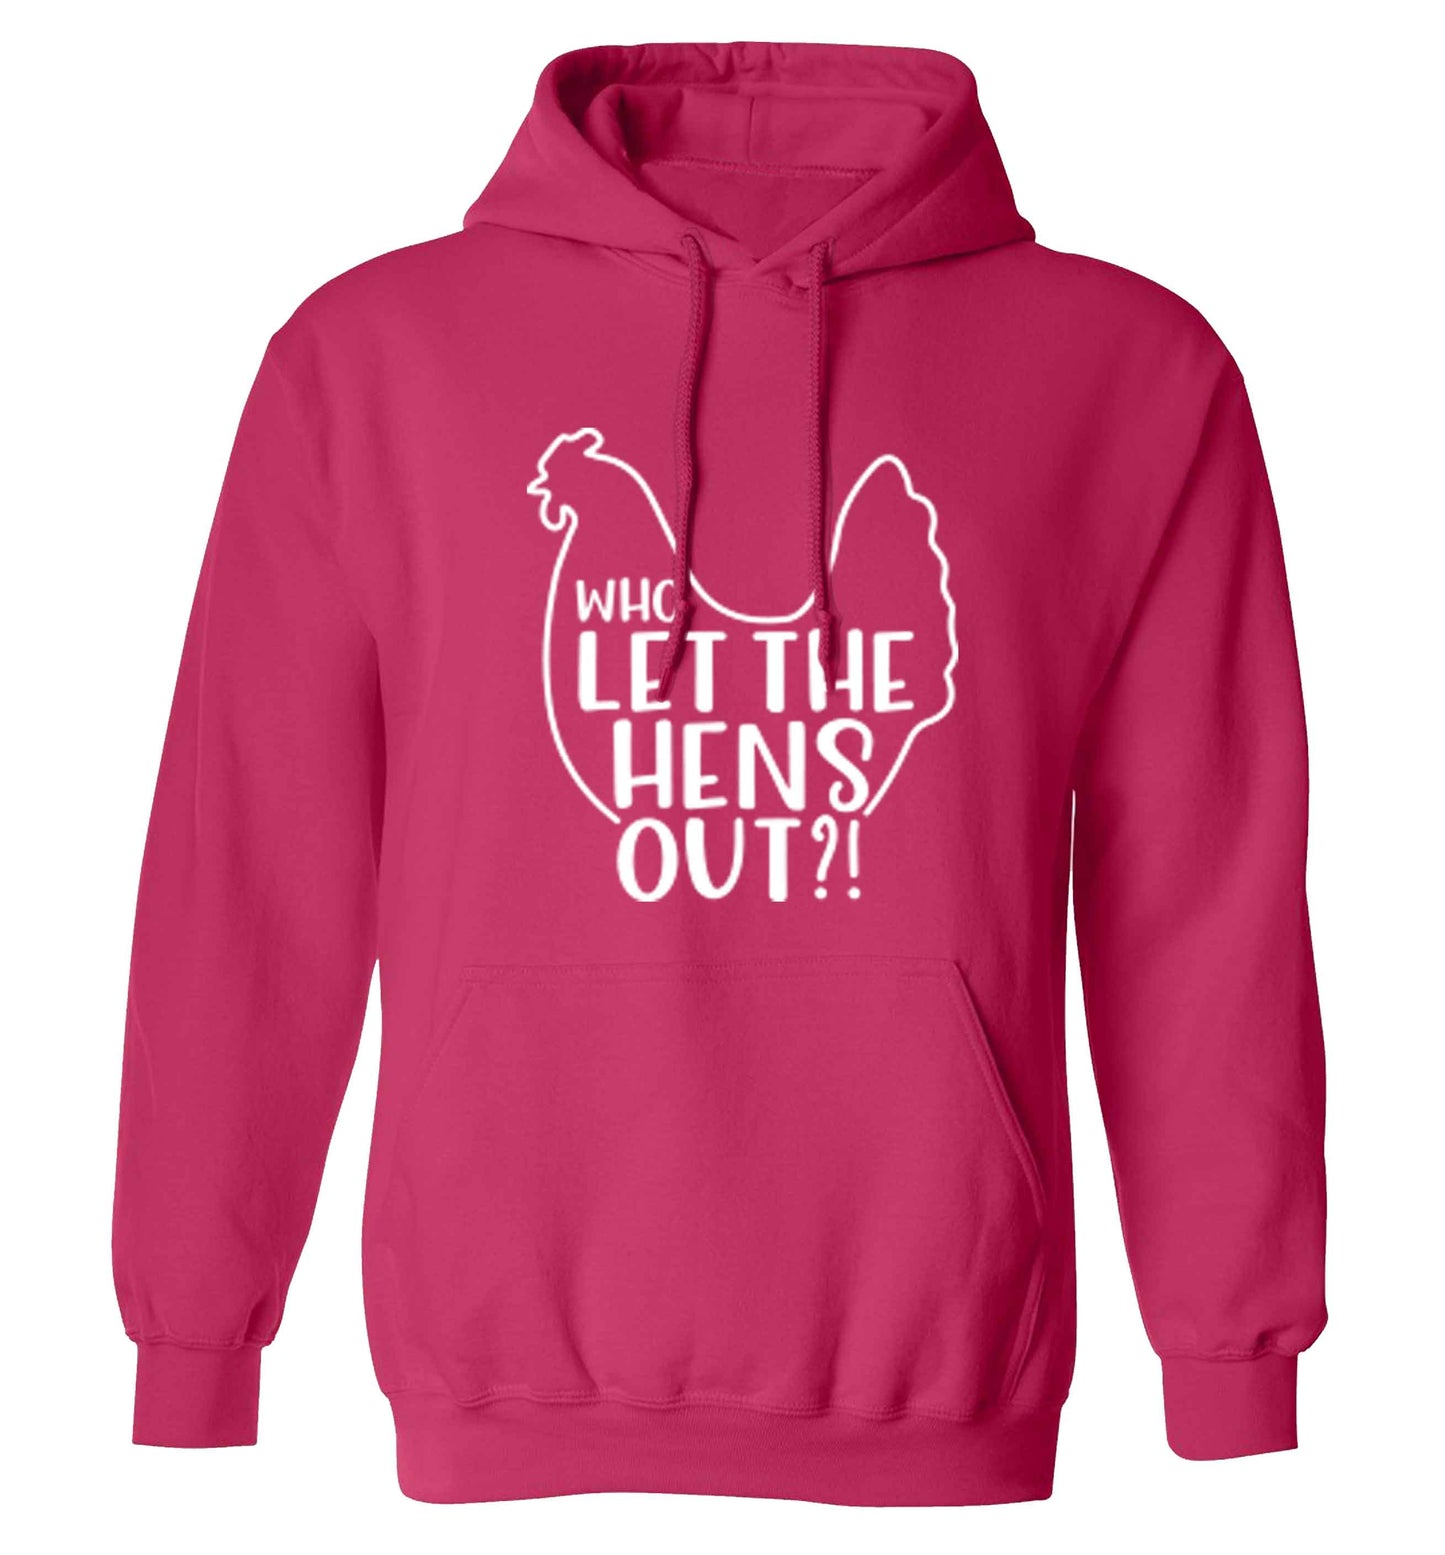 Who let the hens out adults unisex pink hoodie 2XL